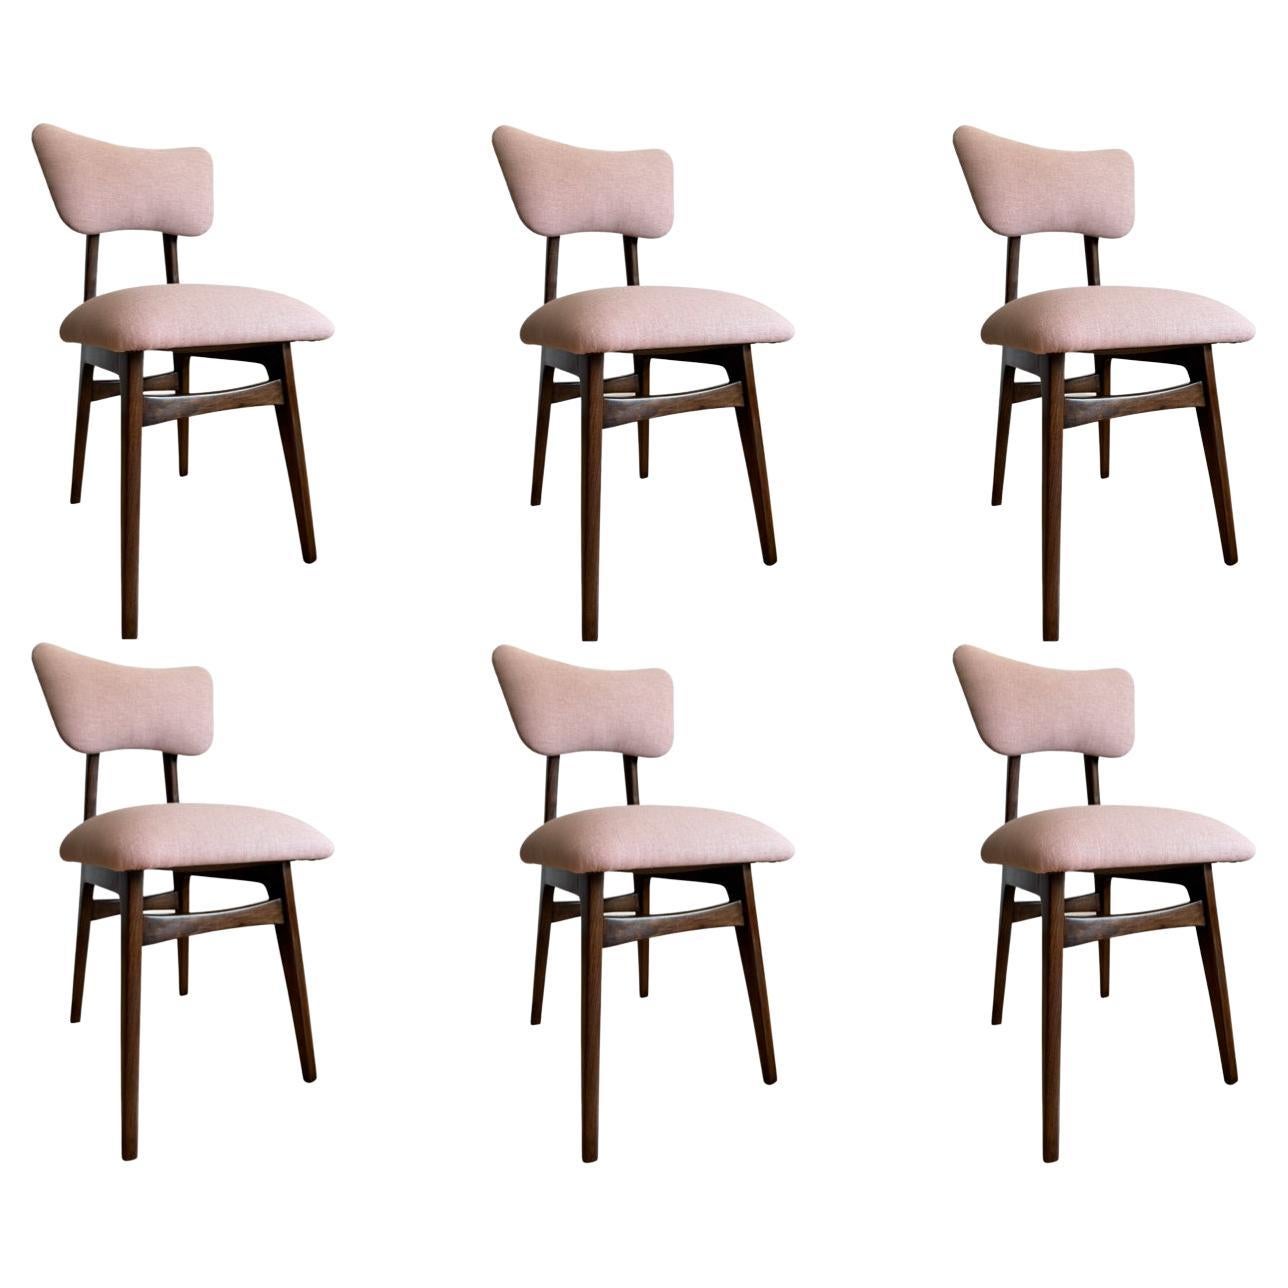 Set of 6 Midcentury Light Pink Dining Chairs, Europe, 1960s For Sale